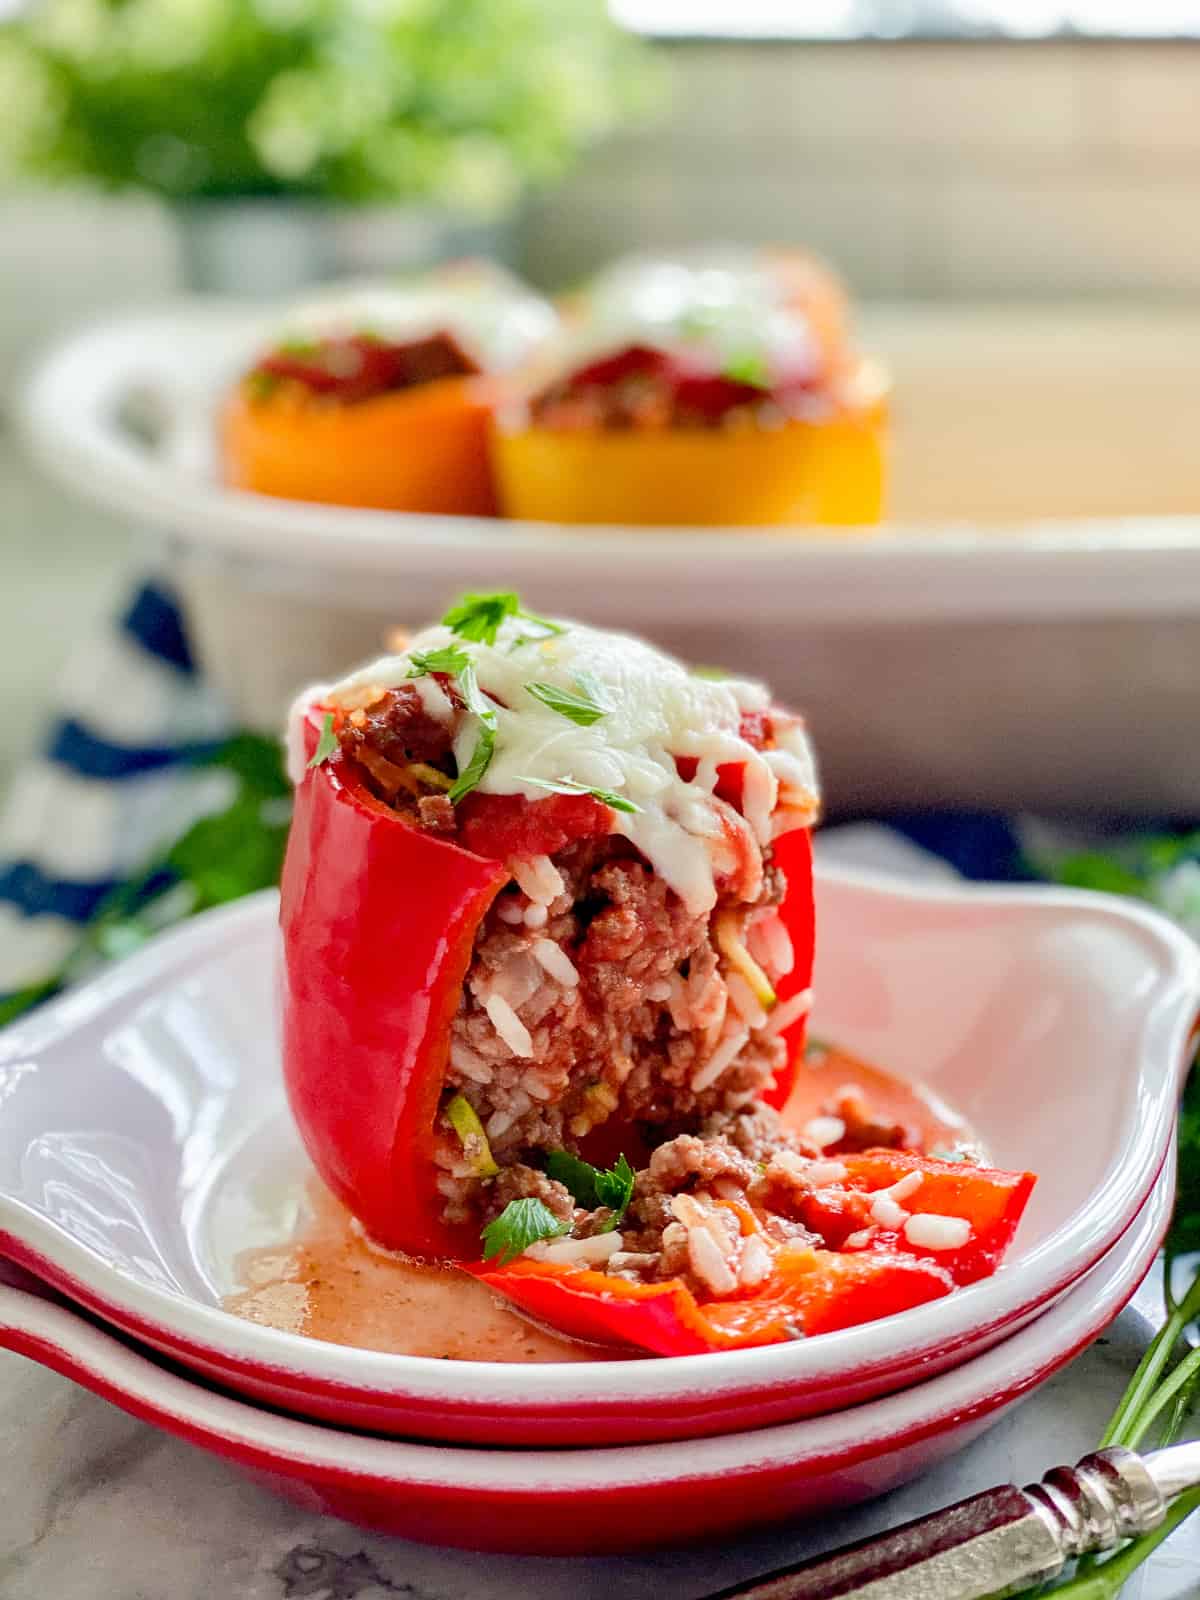 White plate with red trim with red stuffed bell pepper with brown beef and white rice and melted white cheese on top.